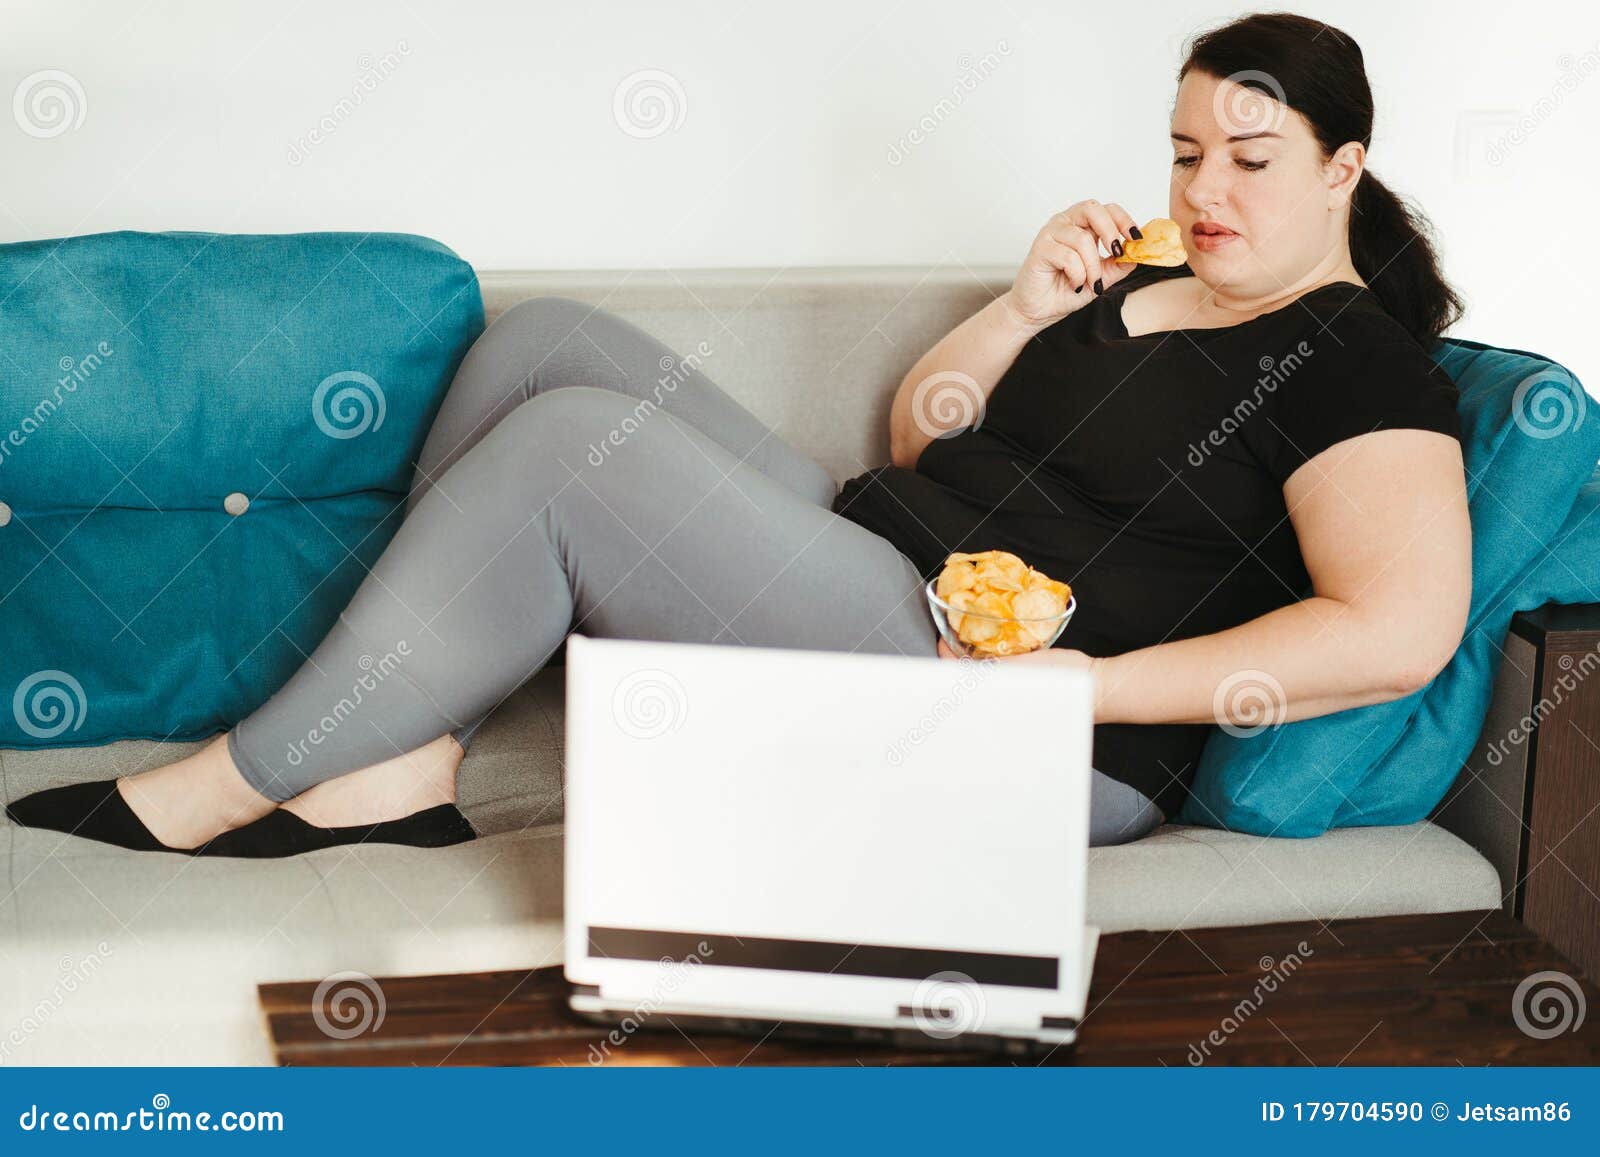 april winston recommends Fat Woman On Couch